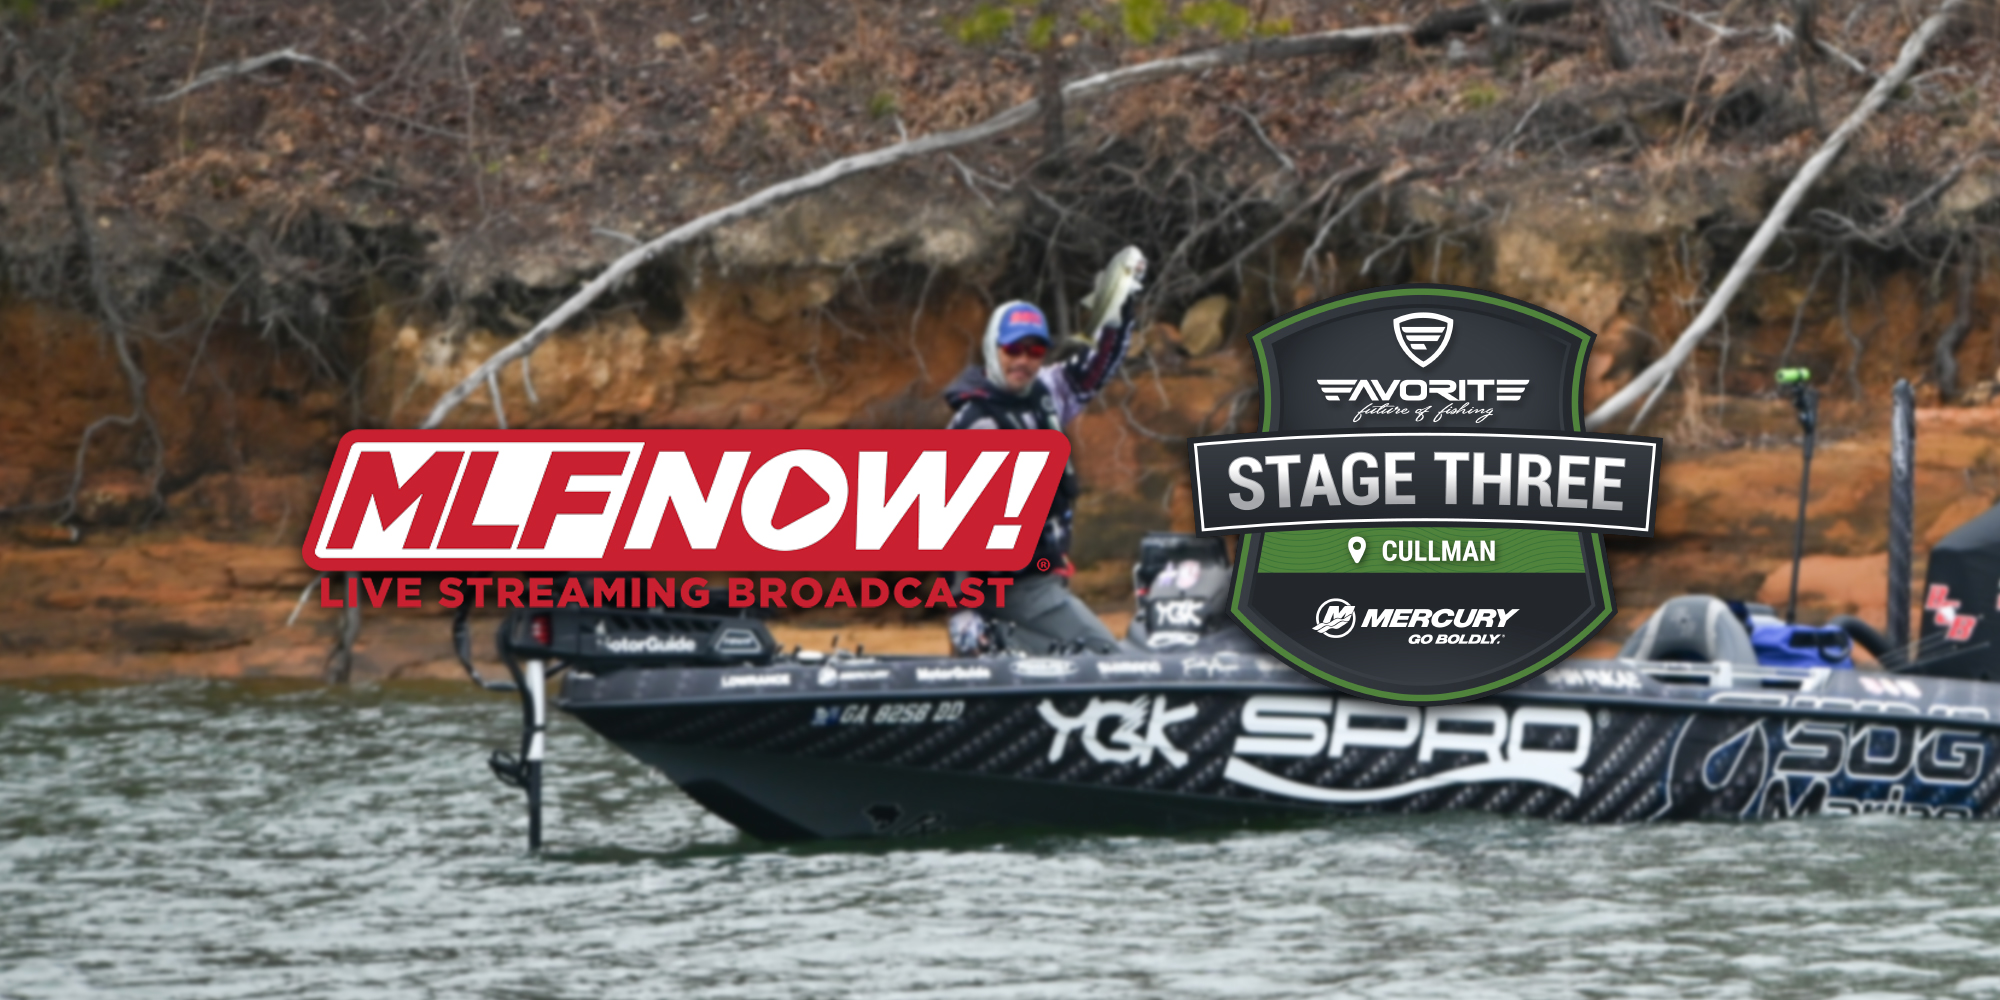 Bass Pro Tour MLF NOW! Live Stream, Stage Three Day 5 (3/6/2022